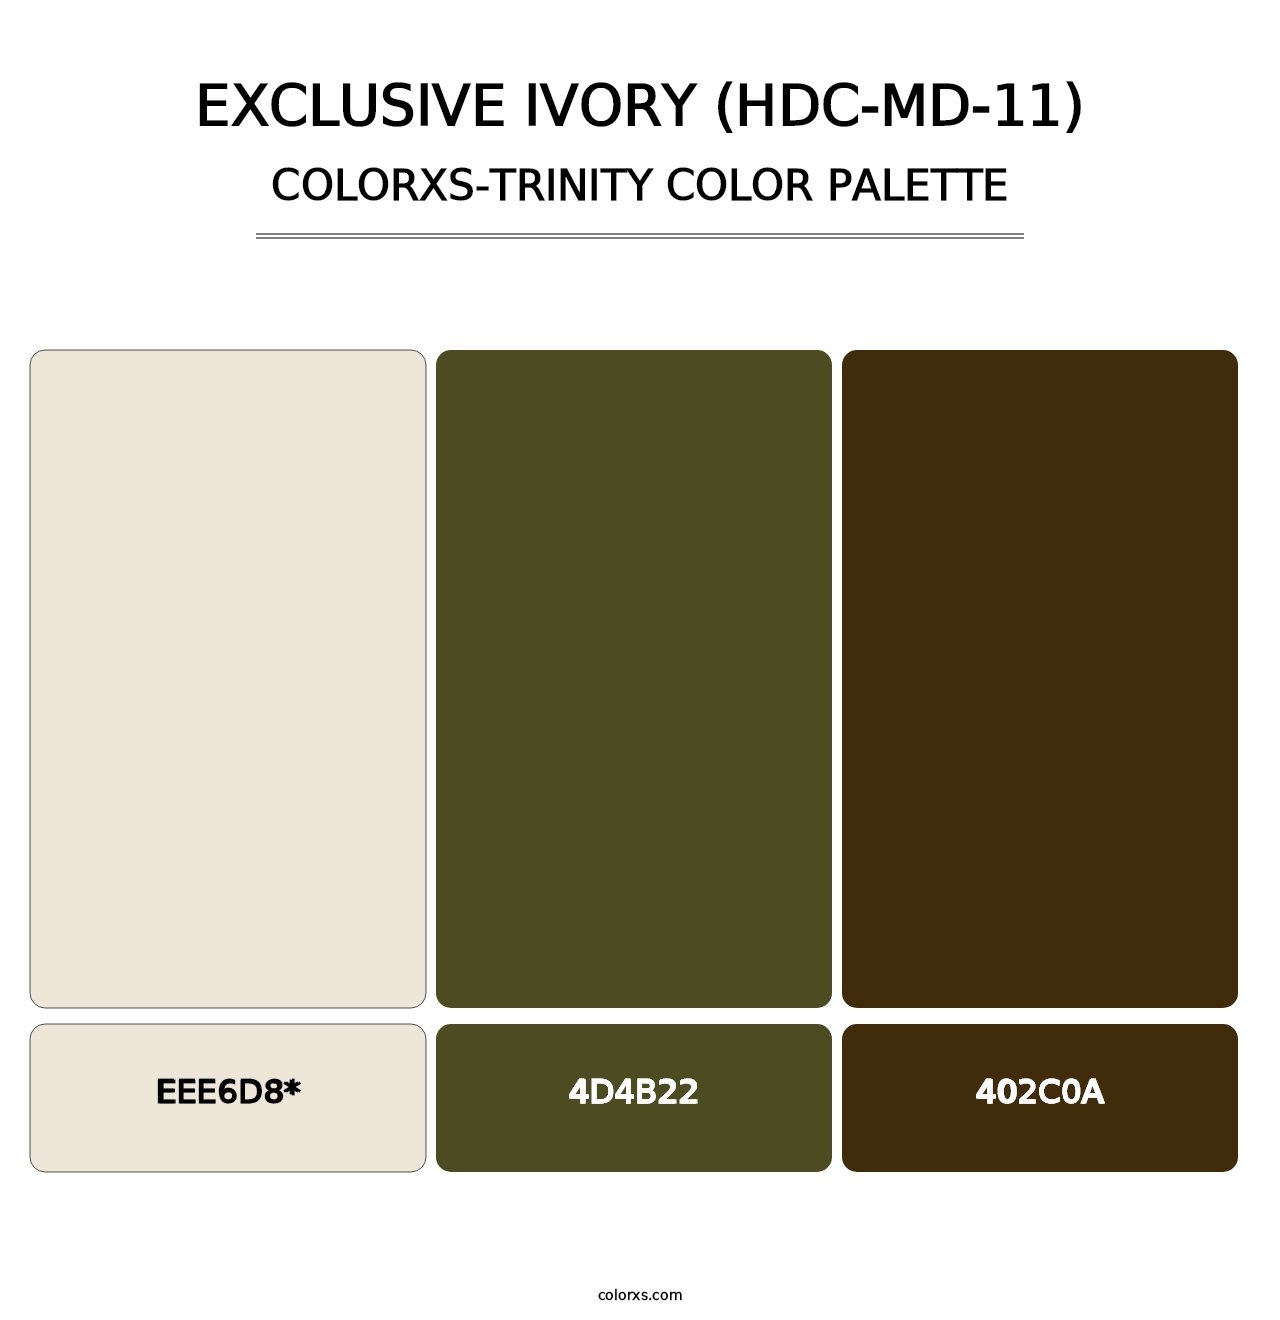 Exclusive Ivory (HDC-MD-11) - Colorxs Trinity Palette